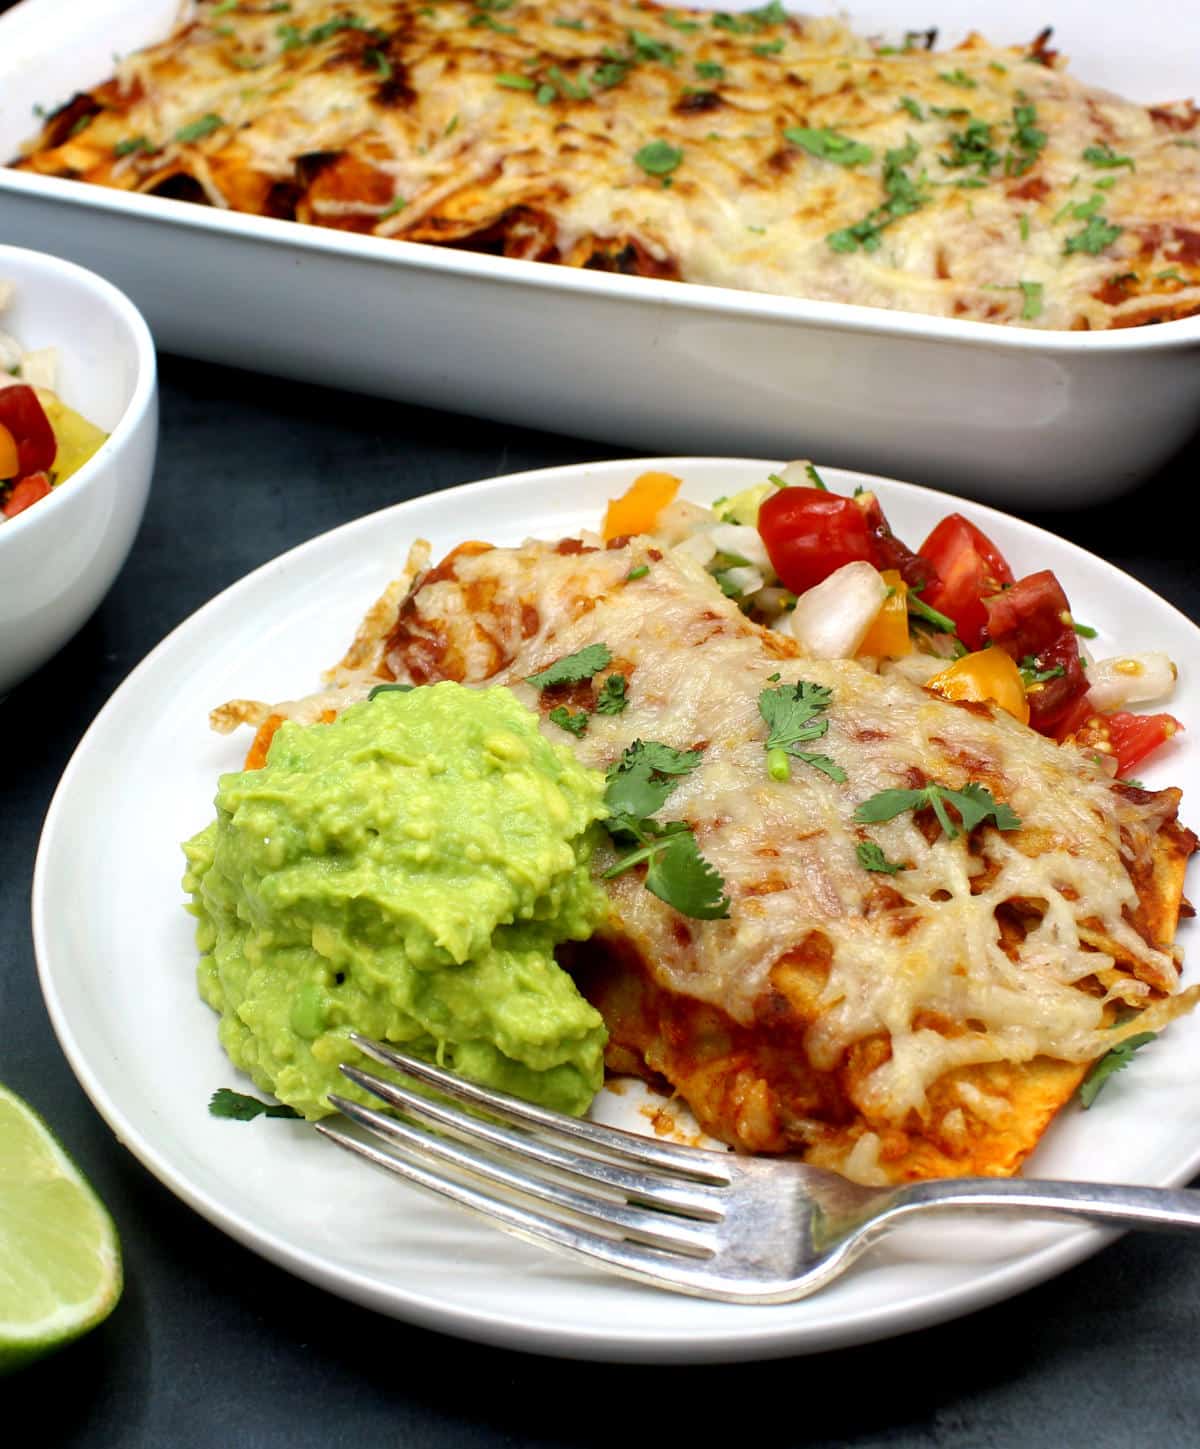 Vegan enchiladas served with a fresh tomato salsa, guacamole on a white plate with a fork.